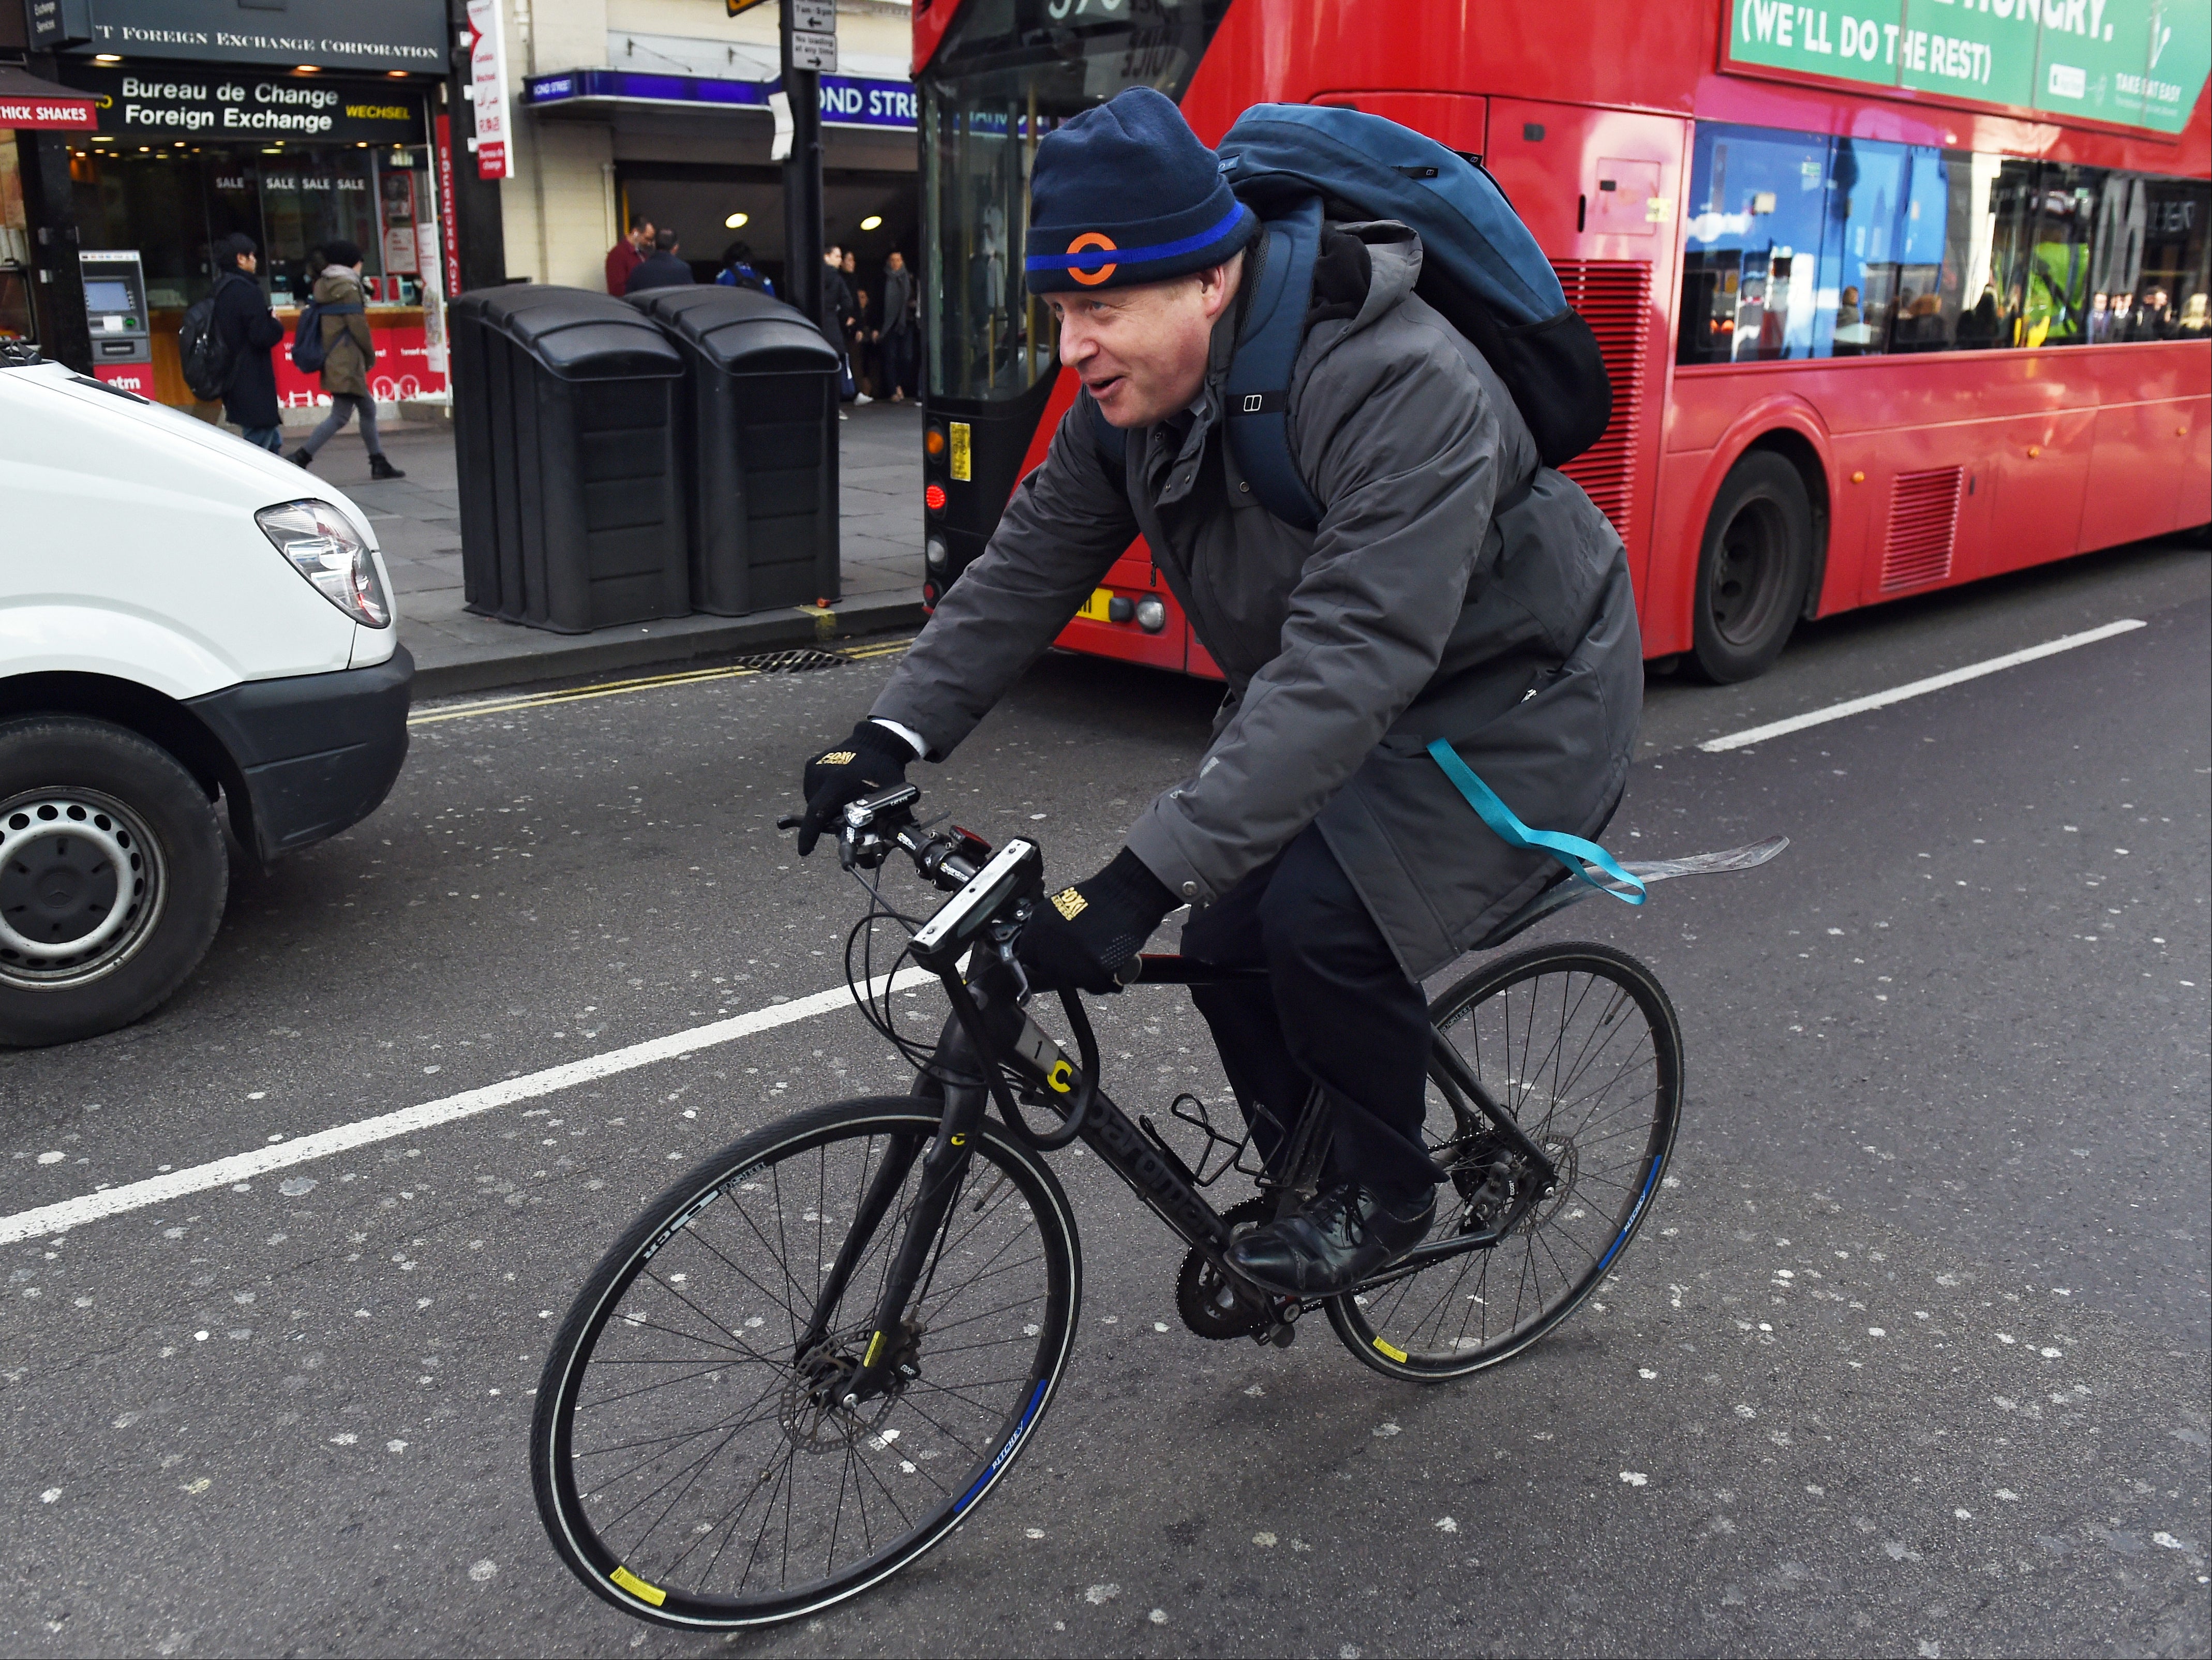 Criticism of British Prime Minister Boris Johnson rose after he was spotted cycling in the Queen Elizabeth Olympic park in Stratford, east London, seven miles away from n10 Downing street where he resides